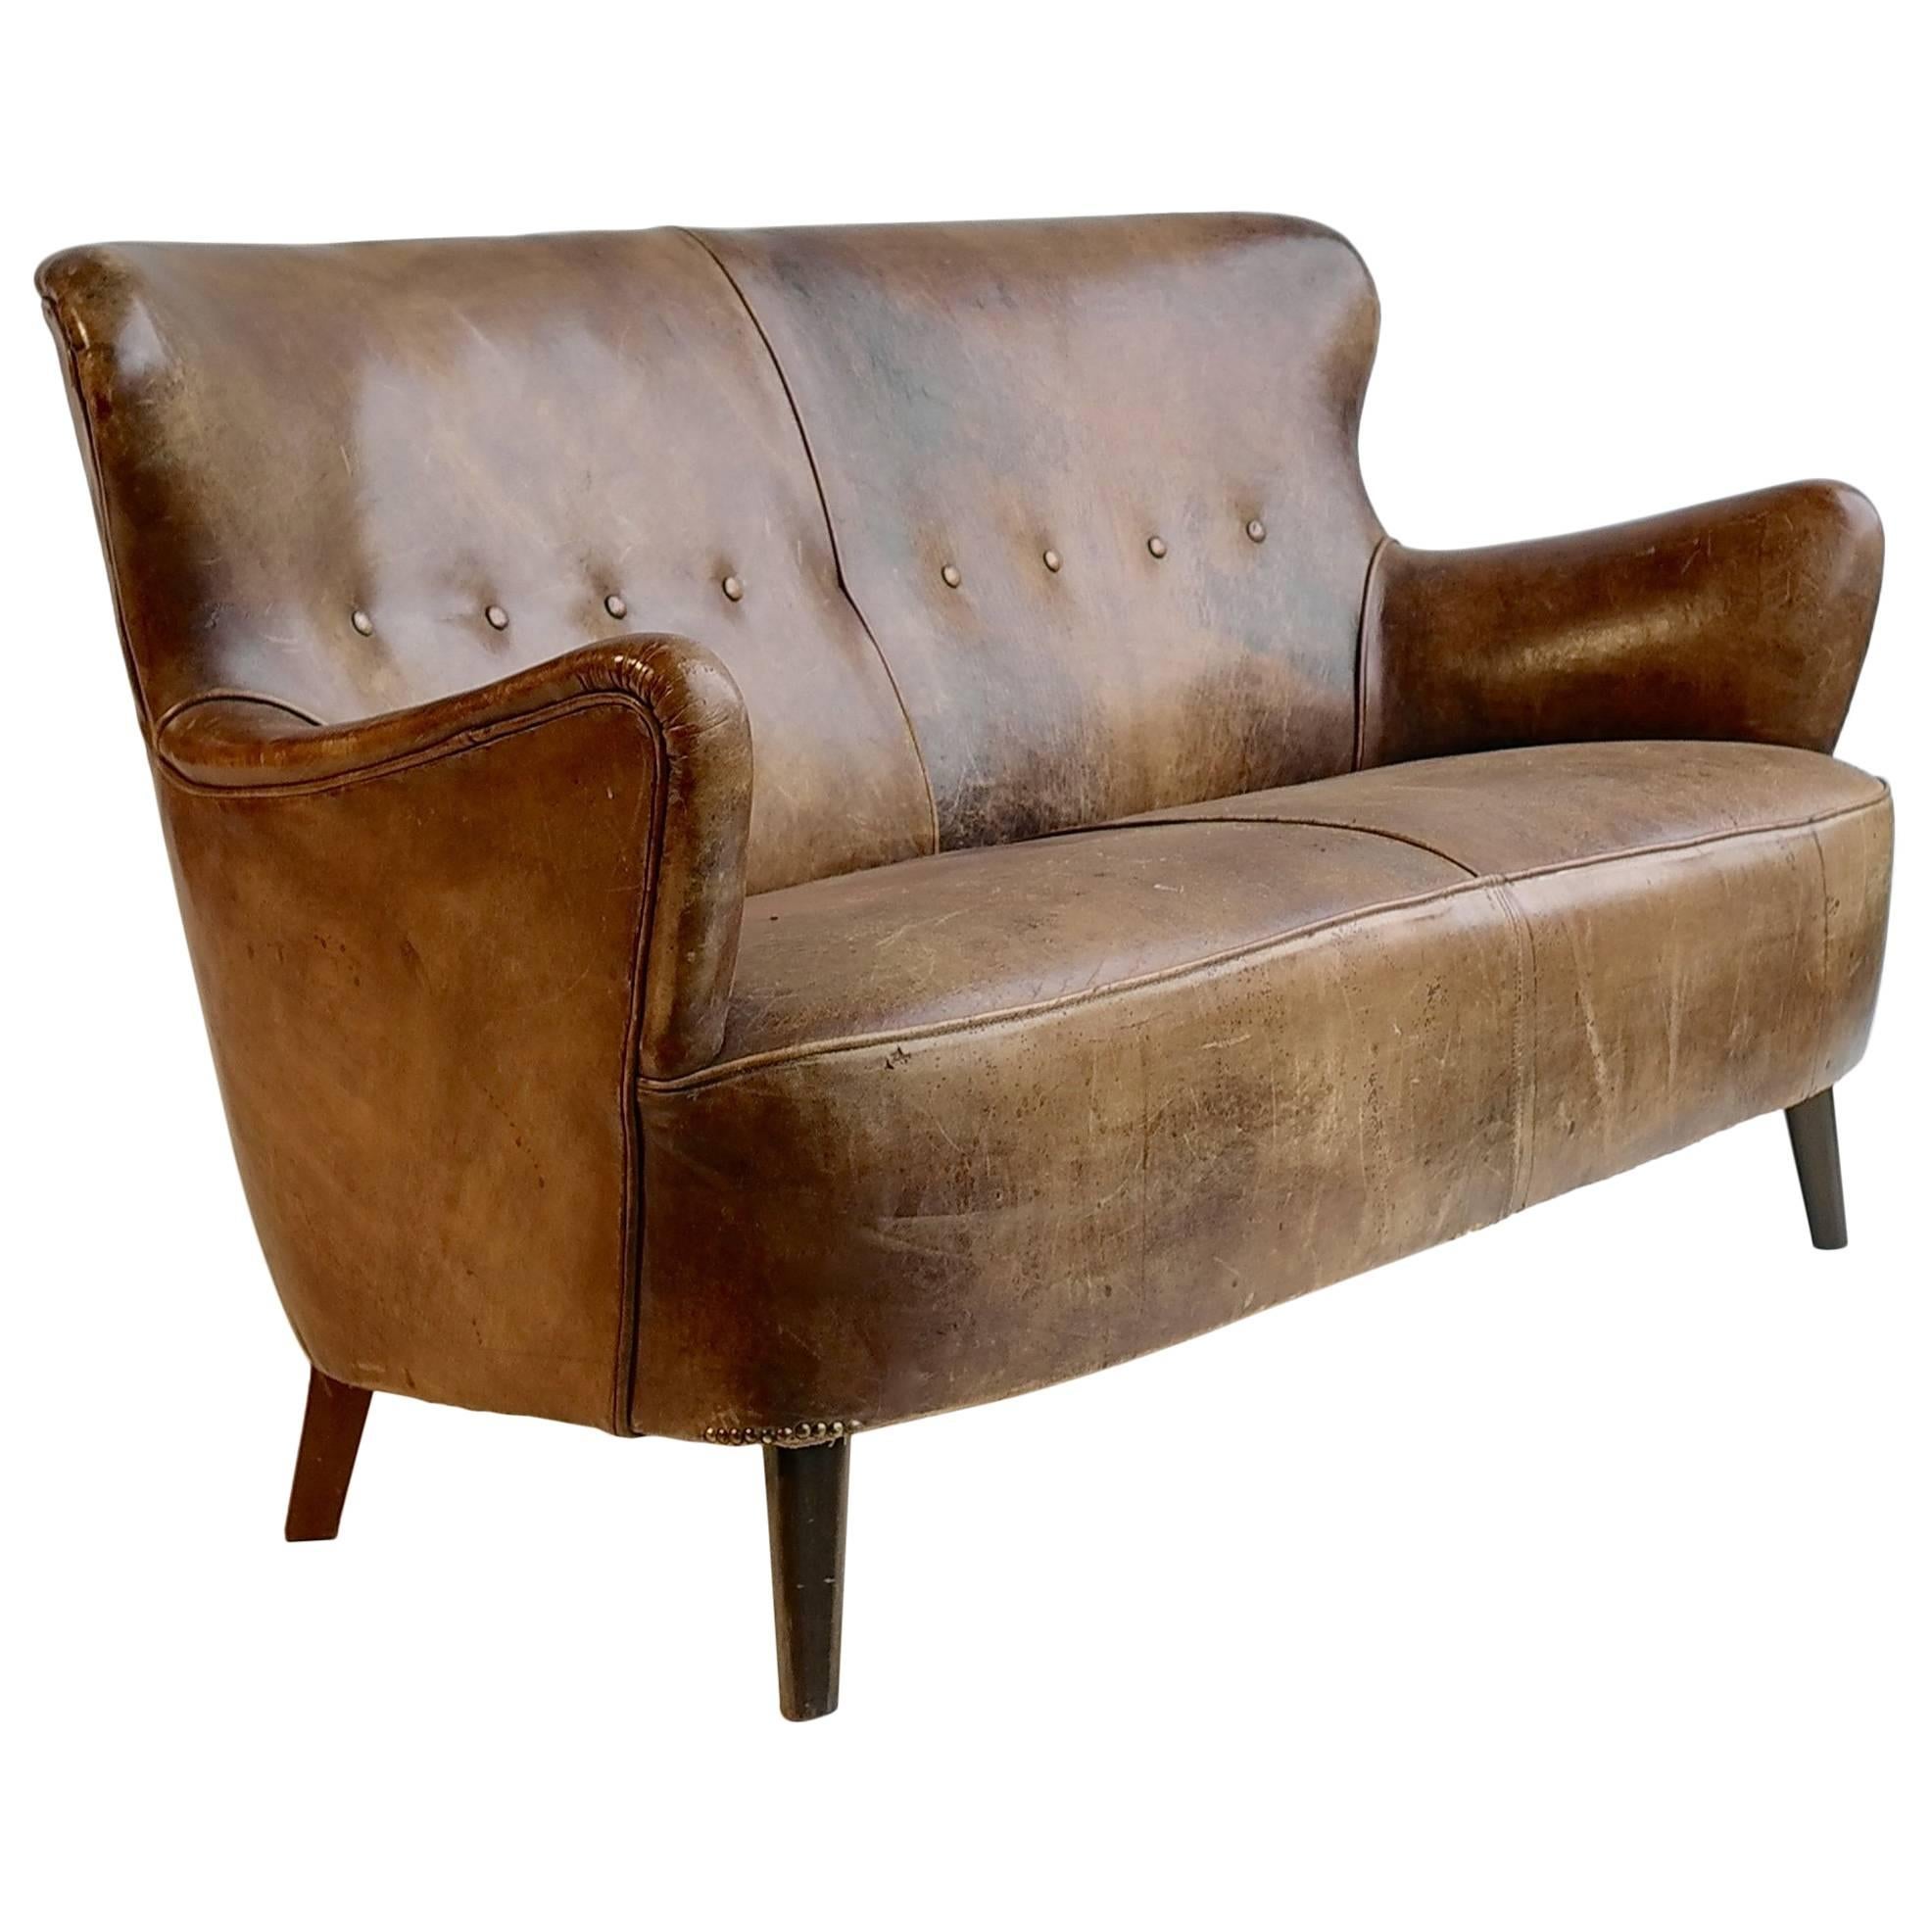 Cognac Leather Sofa with a Rich Patina, by Theo Ruth for Artifort